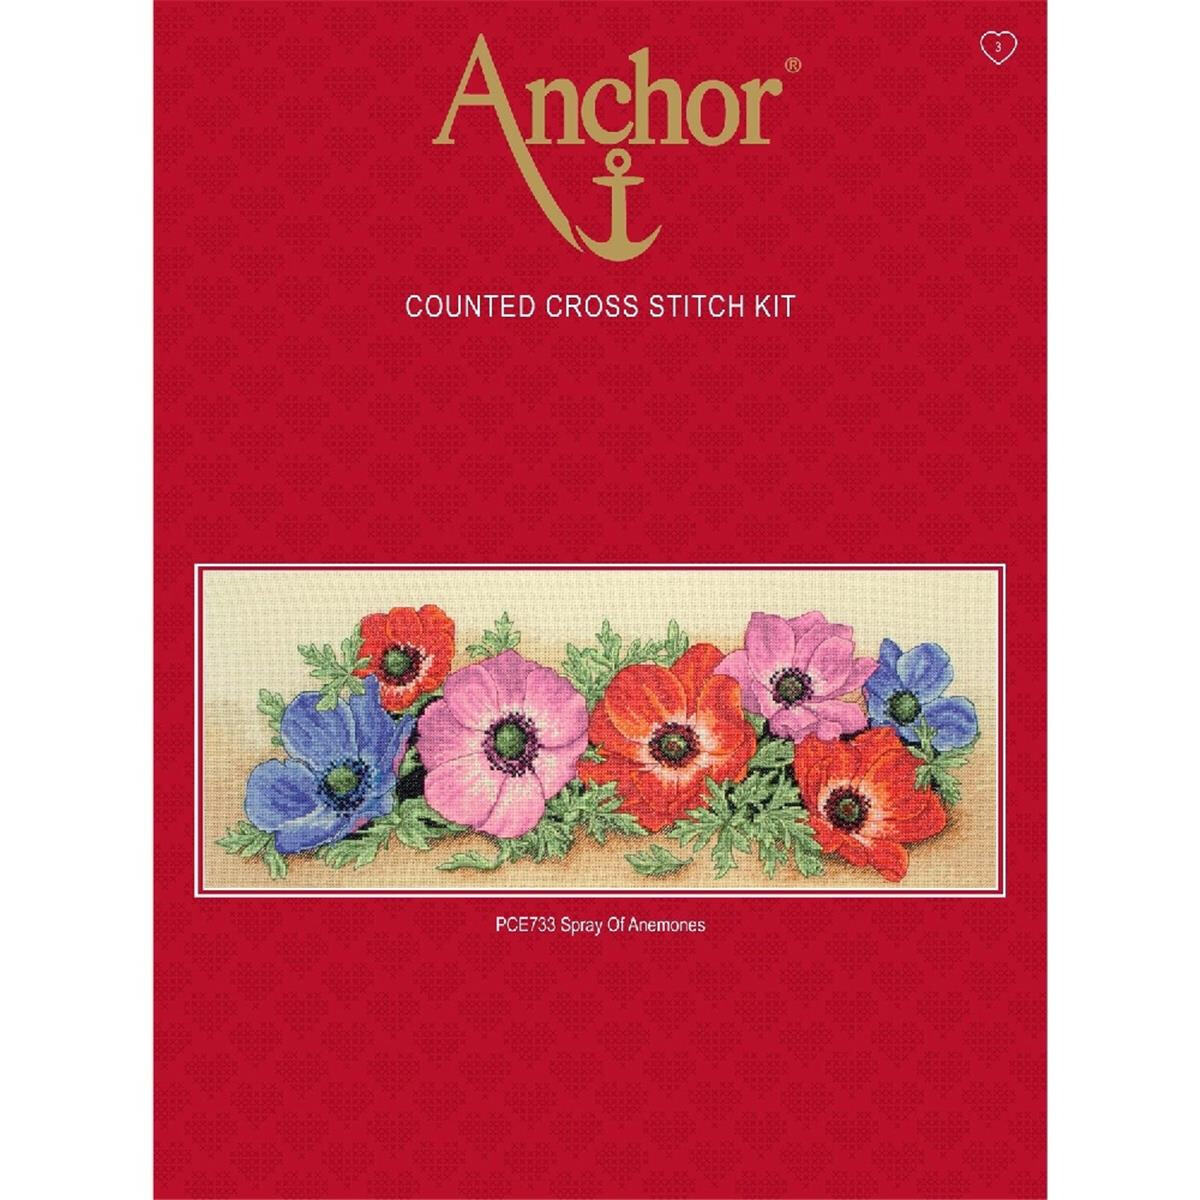 Anchor counted Cross Stitch kit "Spray Of...